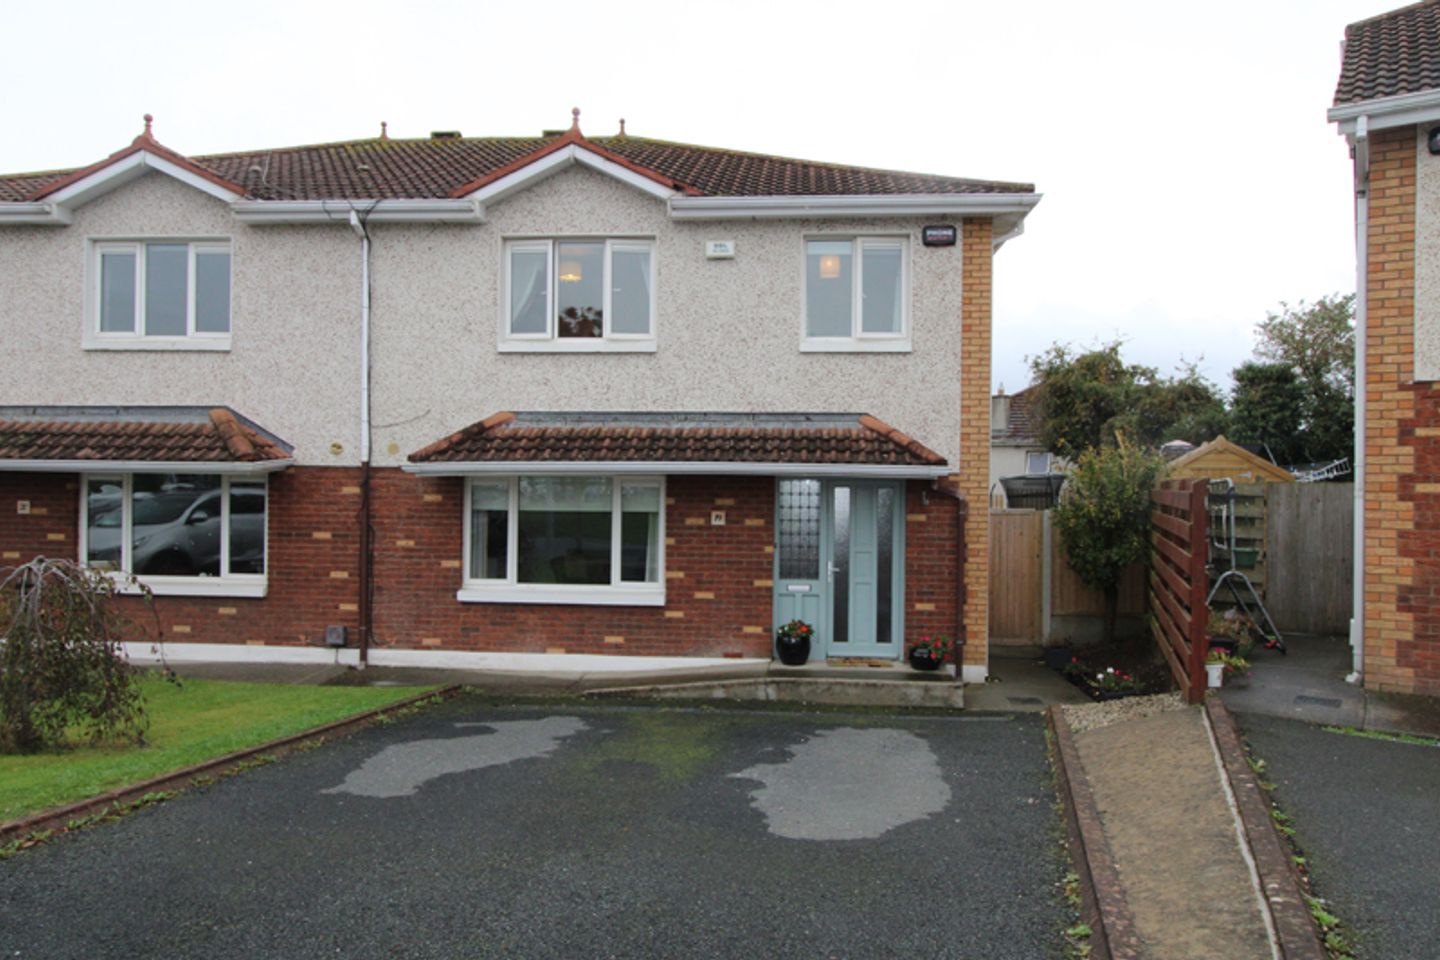 19 Broomhall Court, Rathnew, Co. Wicklow, A67RX72